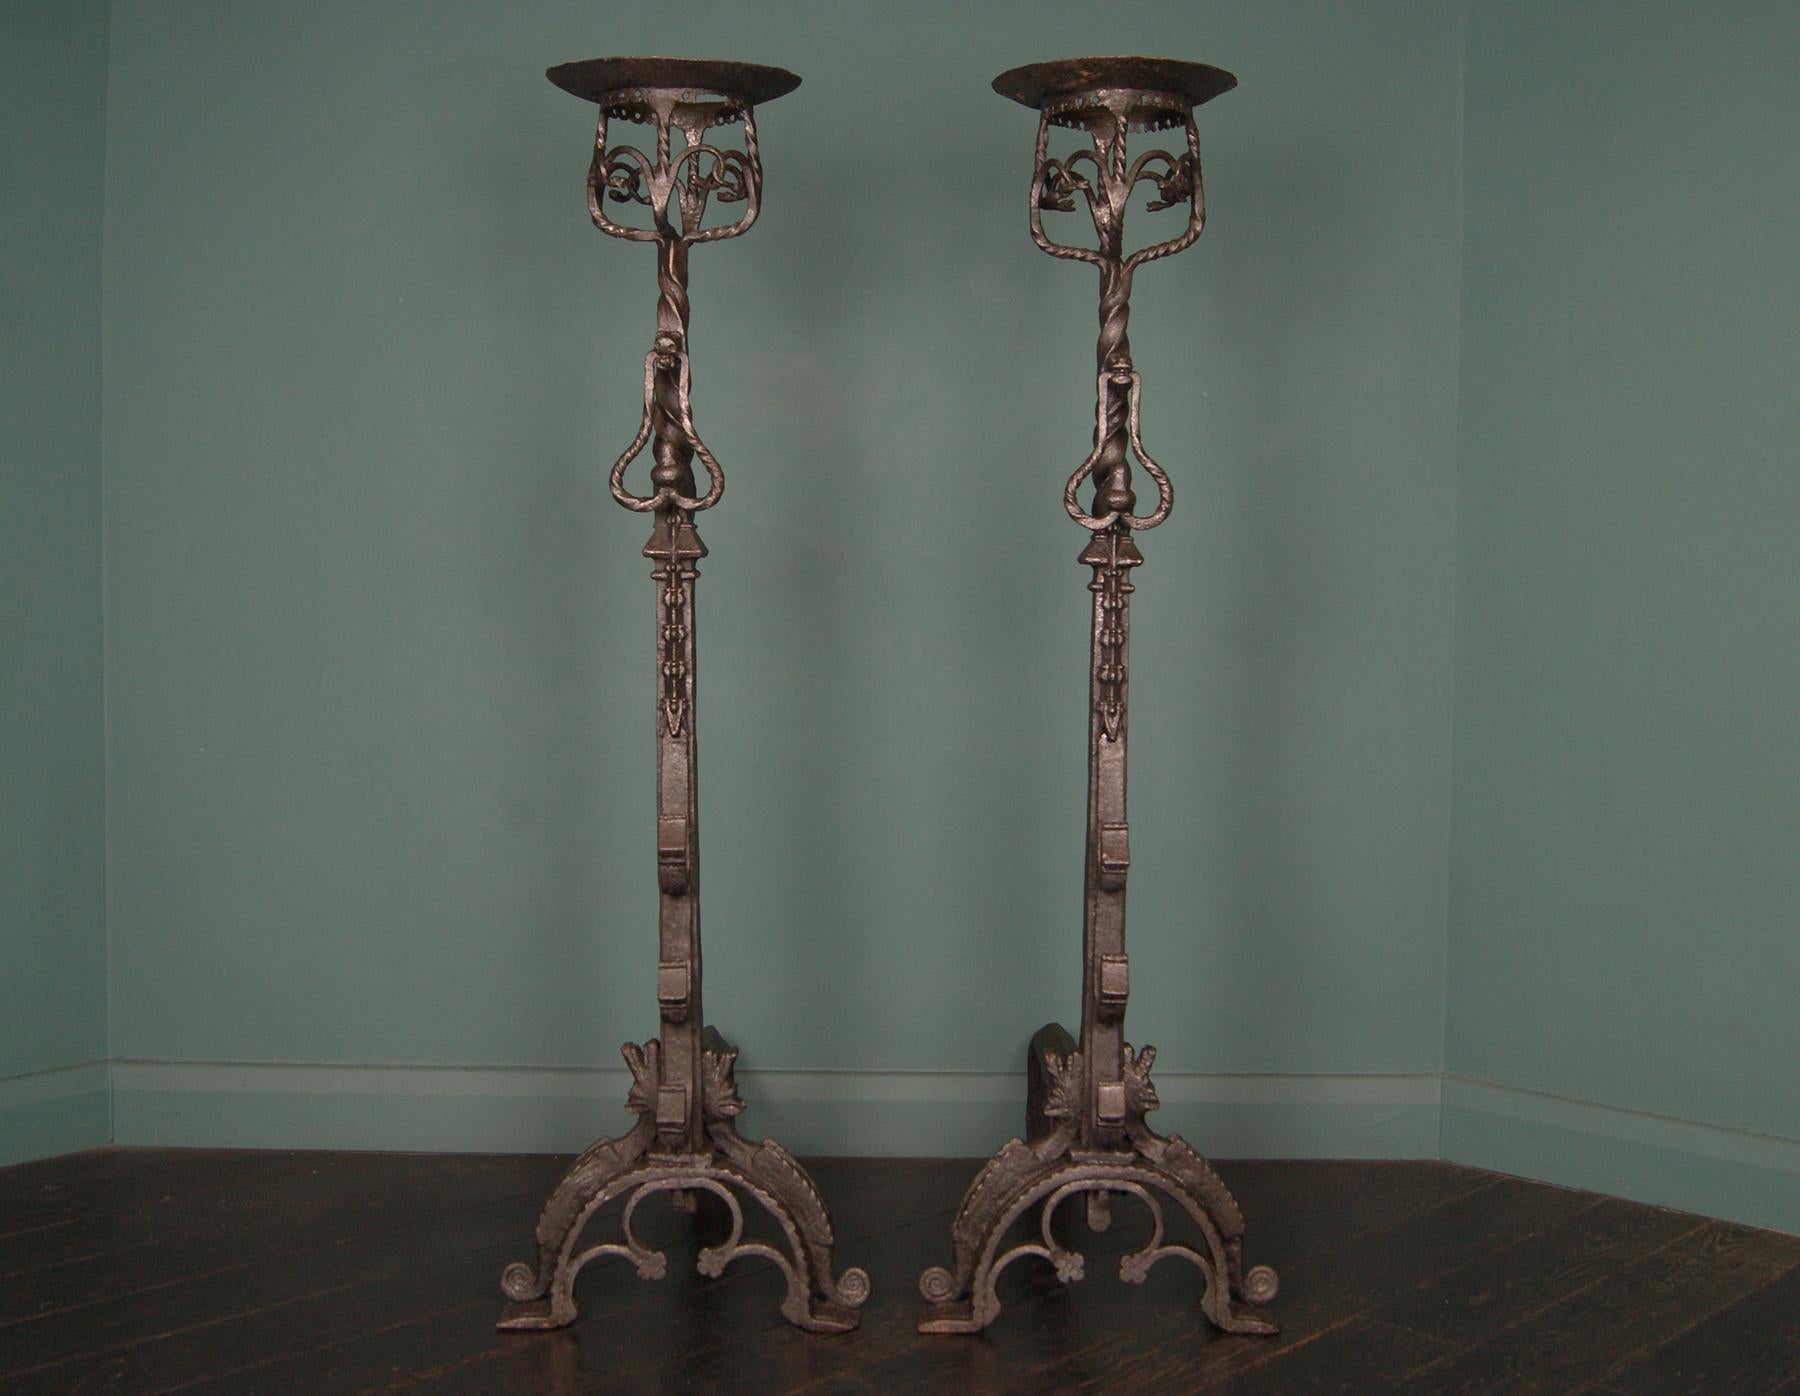 A monumental pair of Neo-Gothic wrought-iron fireplace andirons or fire dogs, extensively adorned with fine blacksmith detail. The standards incorporate ornate spit-hooks, acorn front-handles and cresset finials with inter-twinned serpent and dragon